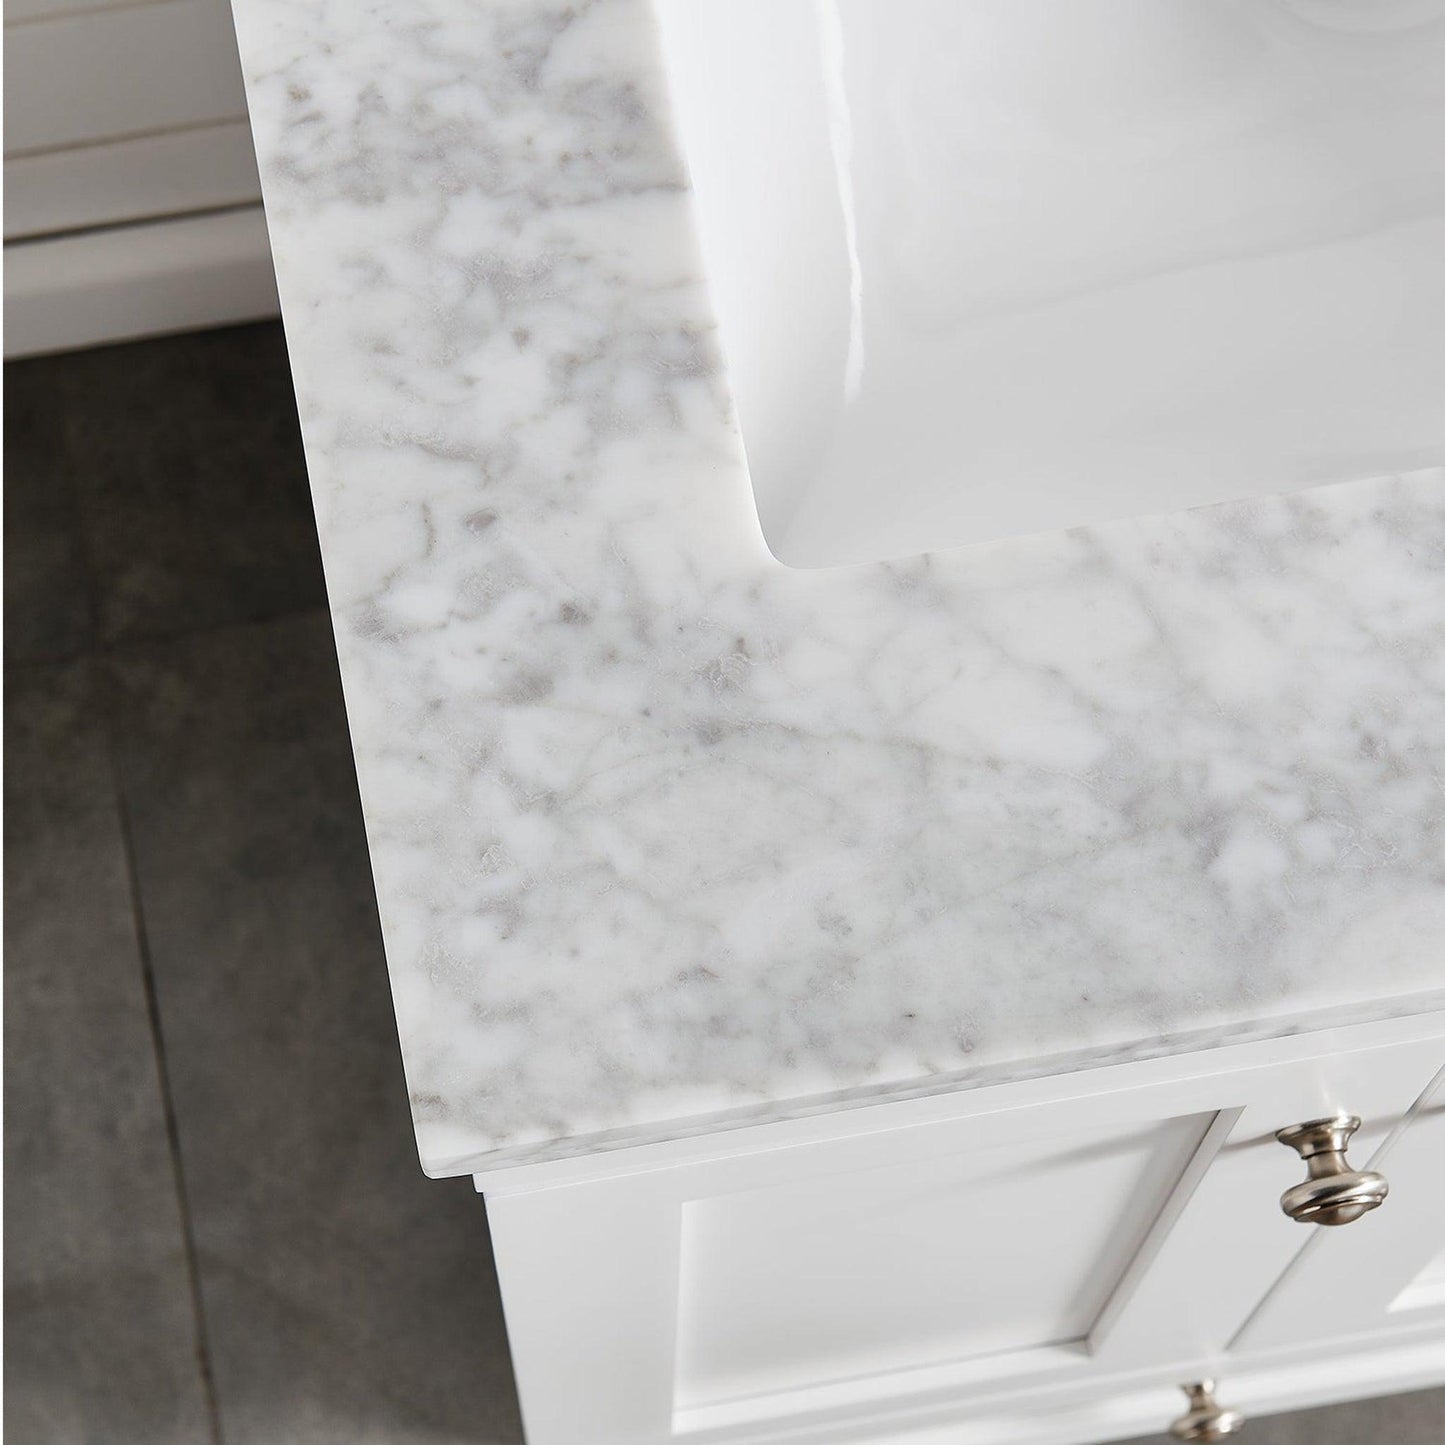 Eviva Acclaim 30" x 34" Freestanding White Bathroom Vanity With White Carrara Marble Countertop and Single Undermount Sink